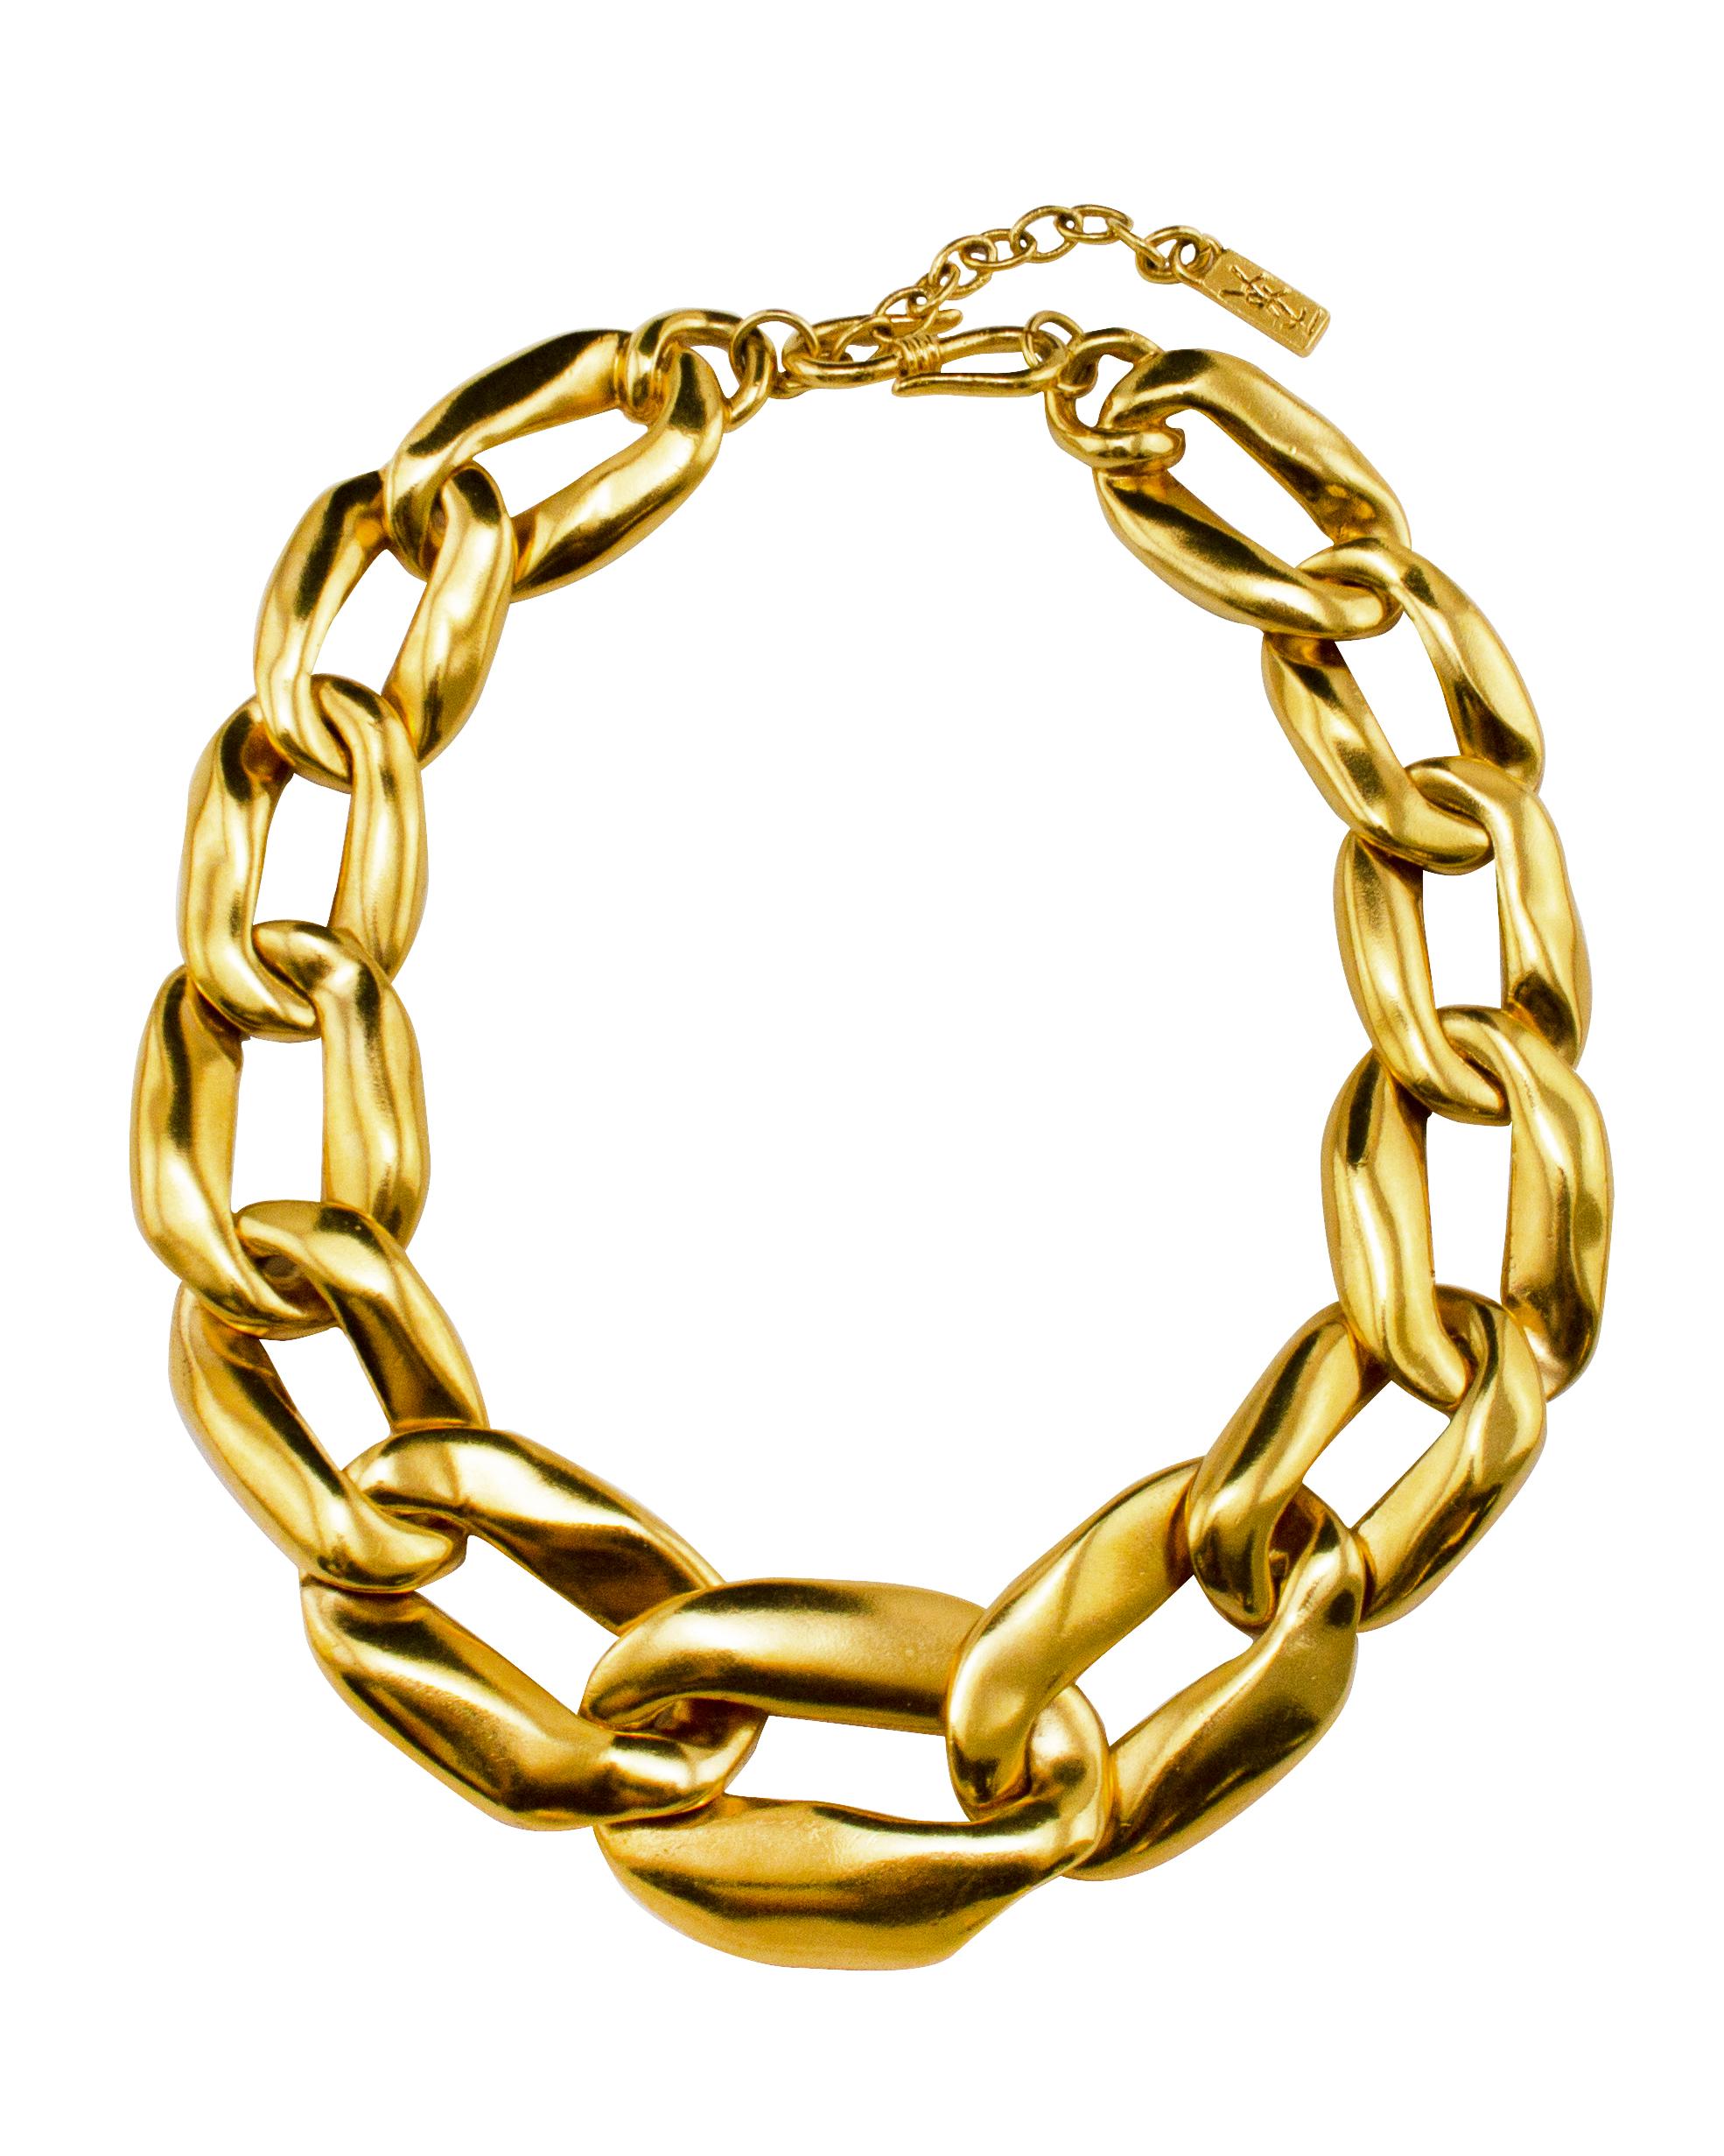 Rent Chanel Jewelry & Handbags at only $55/month